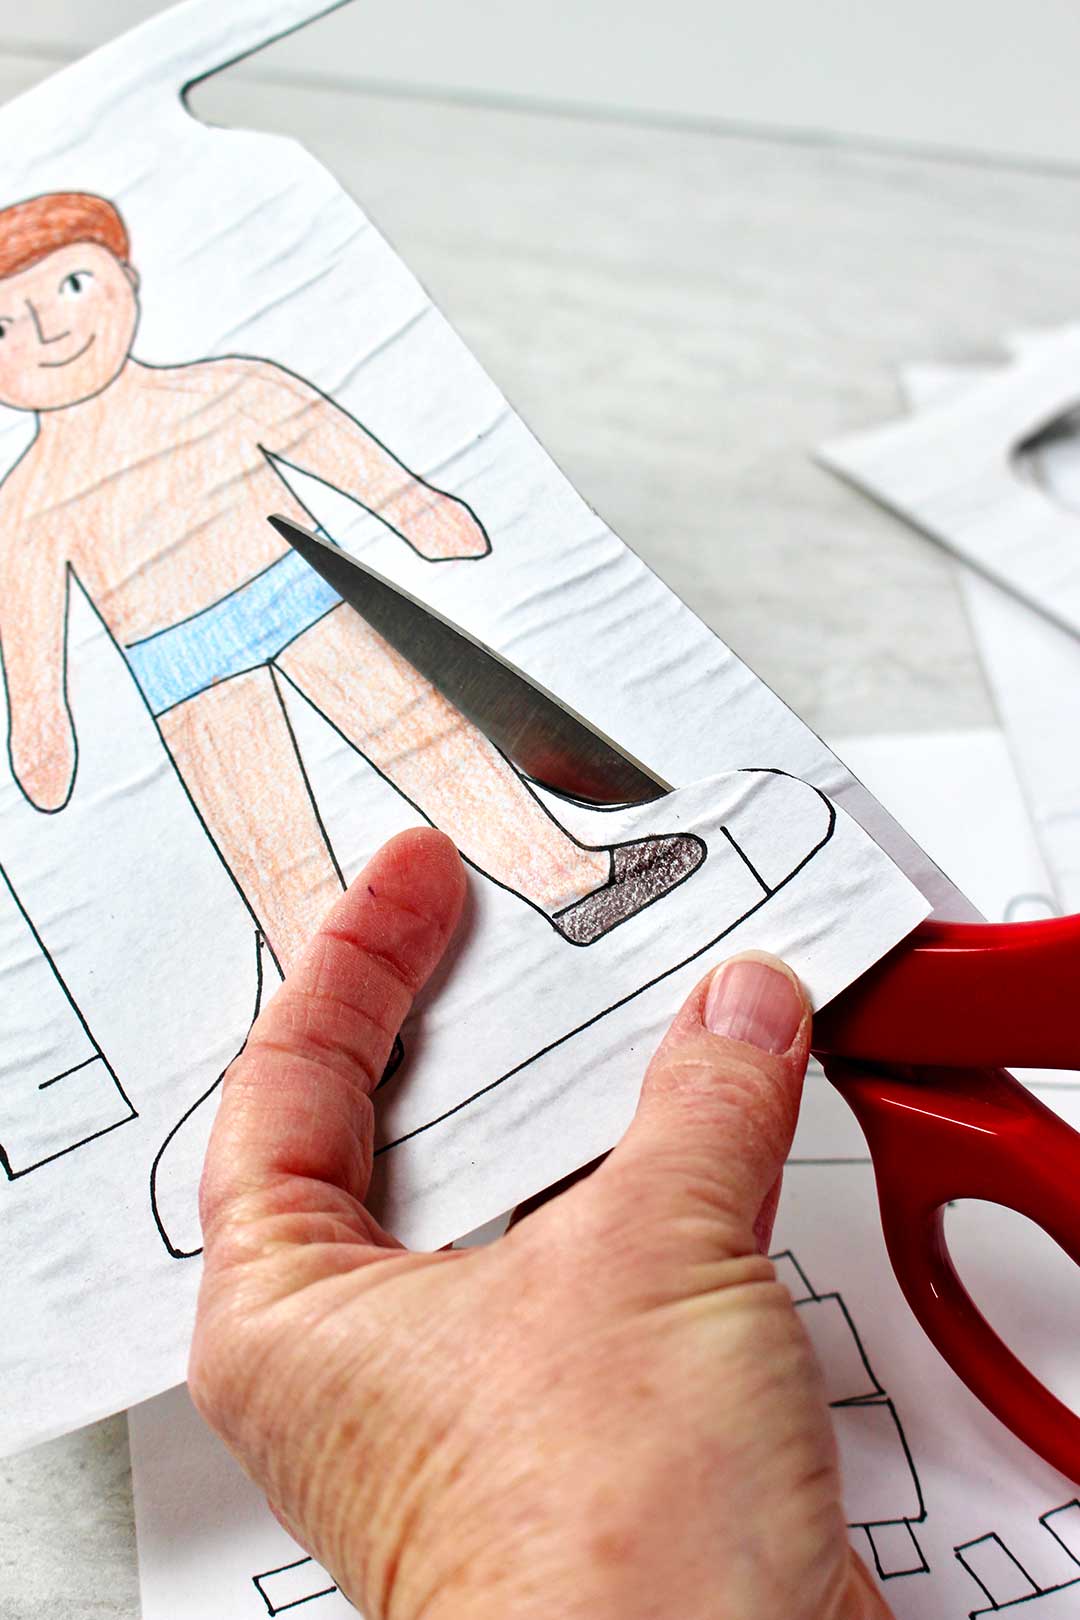 Paper Doll Coloring Pages - Free & Printable!